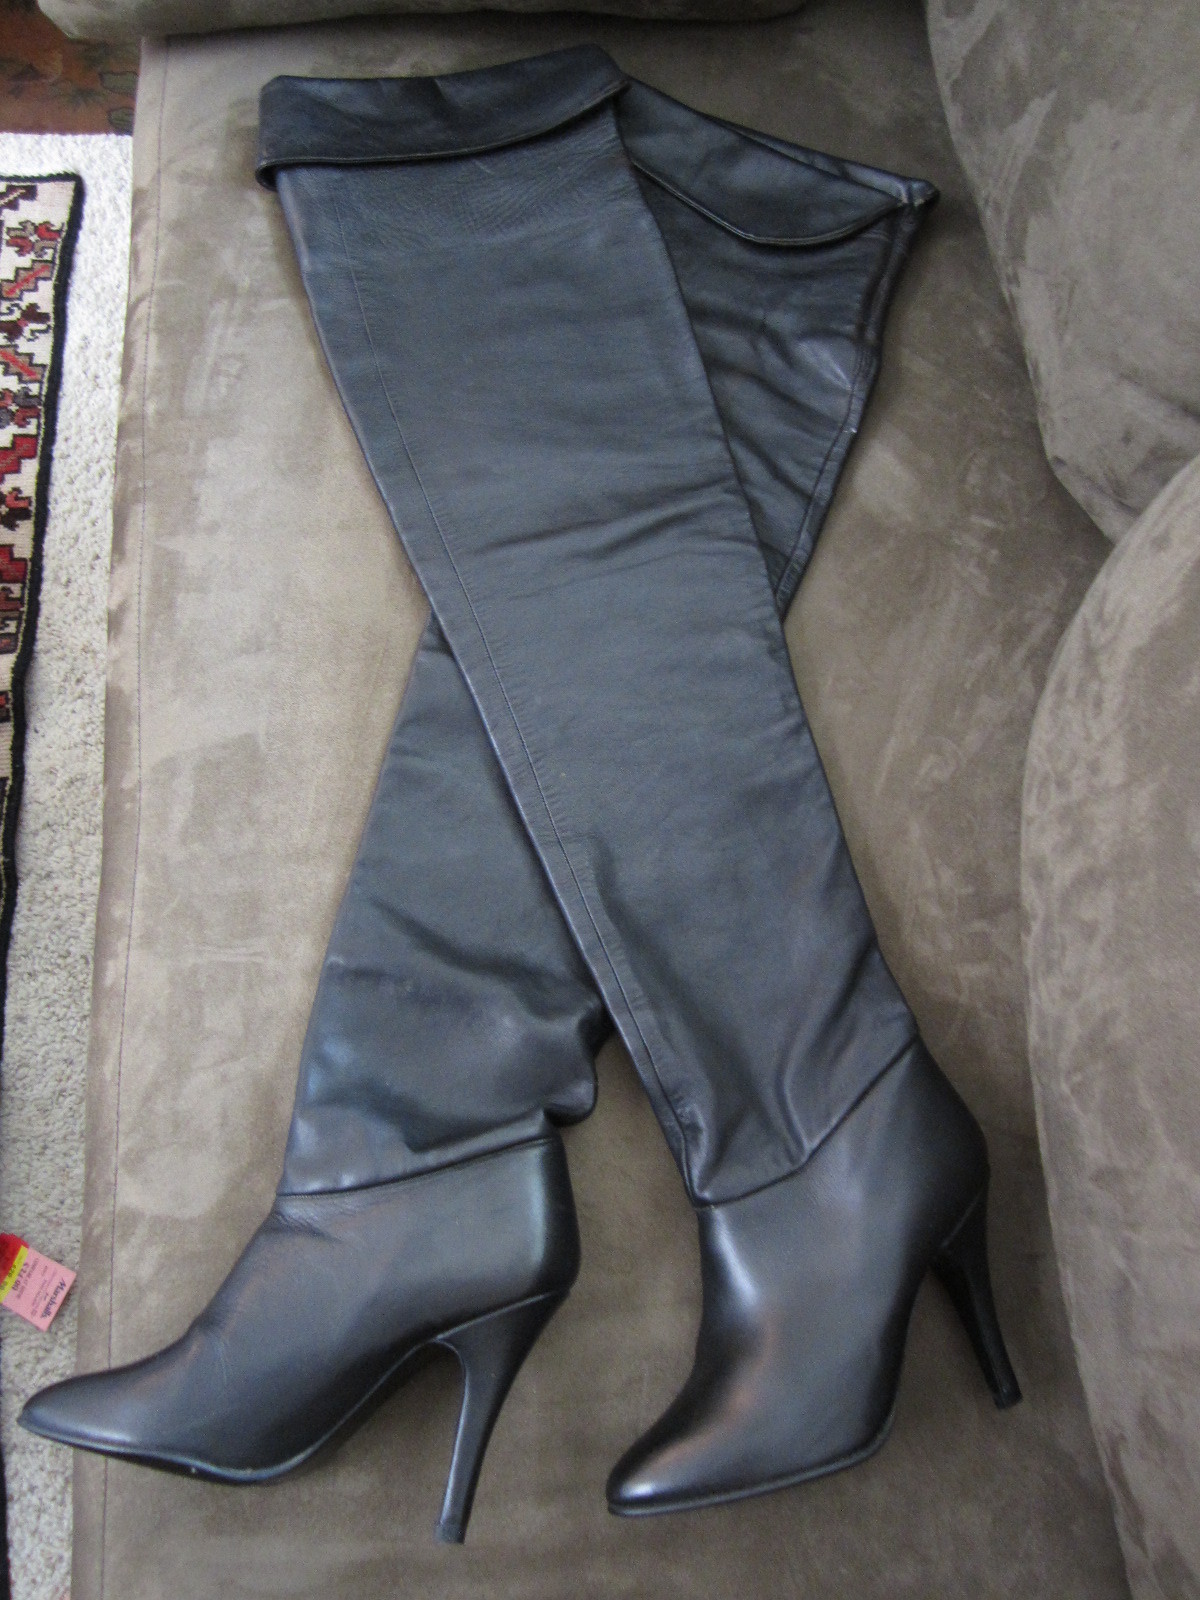 eBay Leather: Never-worn Wild Pair crotch boots sell for $130